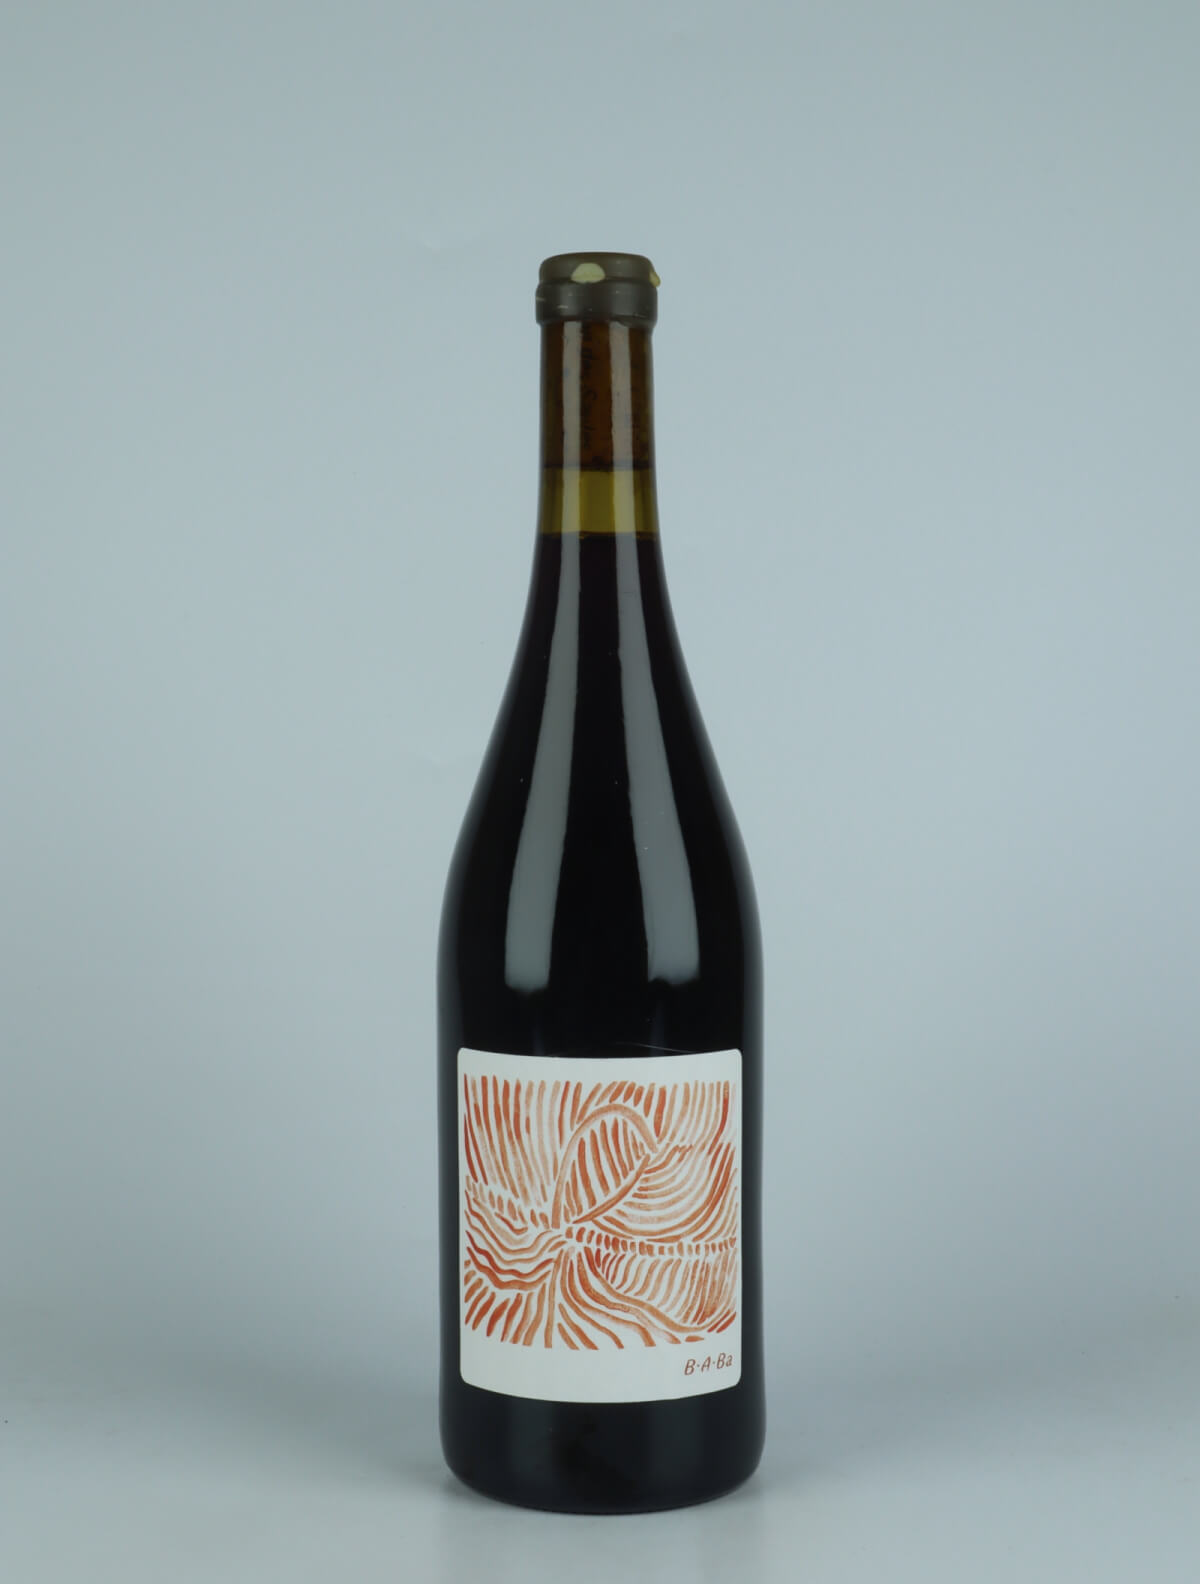 A bottle 2022 Gamay B.A.Ba Red wine from Maison des Saules, Beaujolais in France